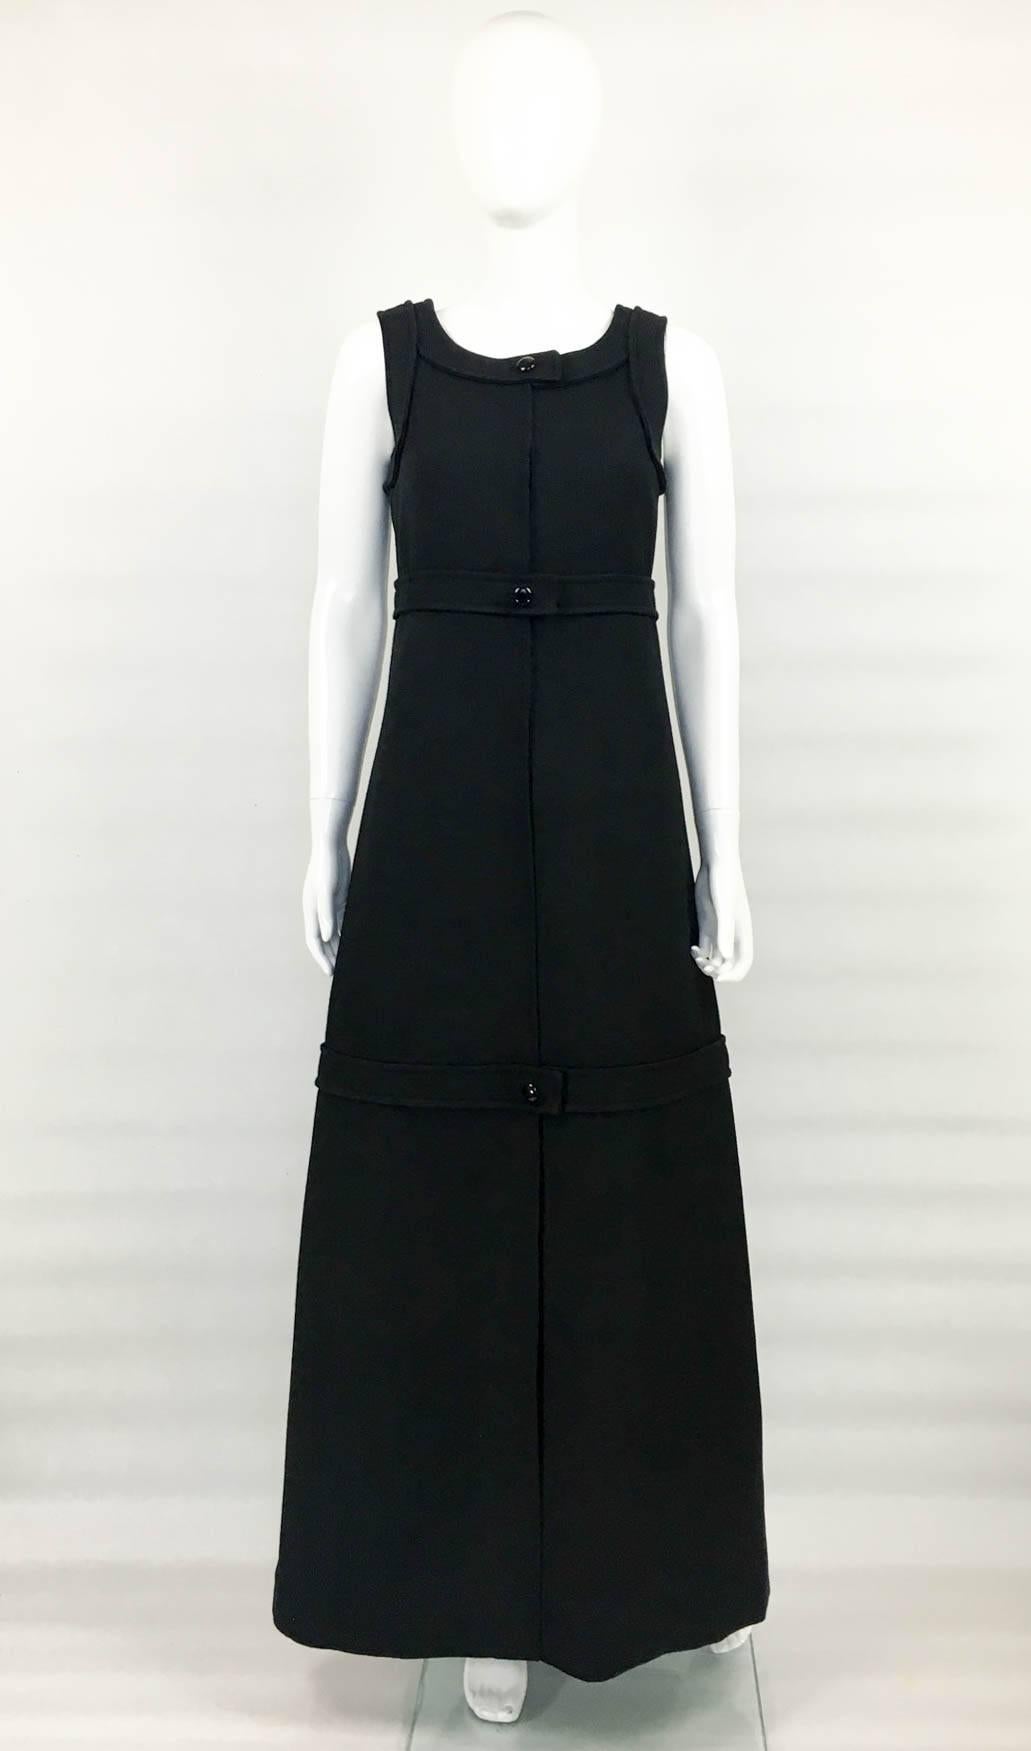 Super Stylish Vintage Andre Courreges Couture Black Dress. This gorgeous numbered couture dress by Courreges (number on label: 69525) dates back from the late 1960s and is made in wool. The impeccable construction, high quality and attention to